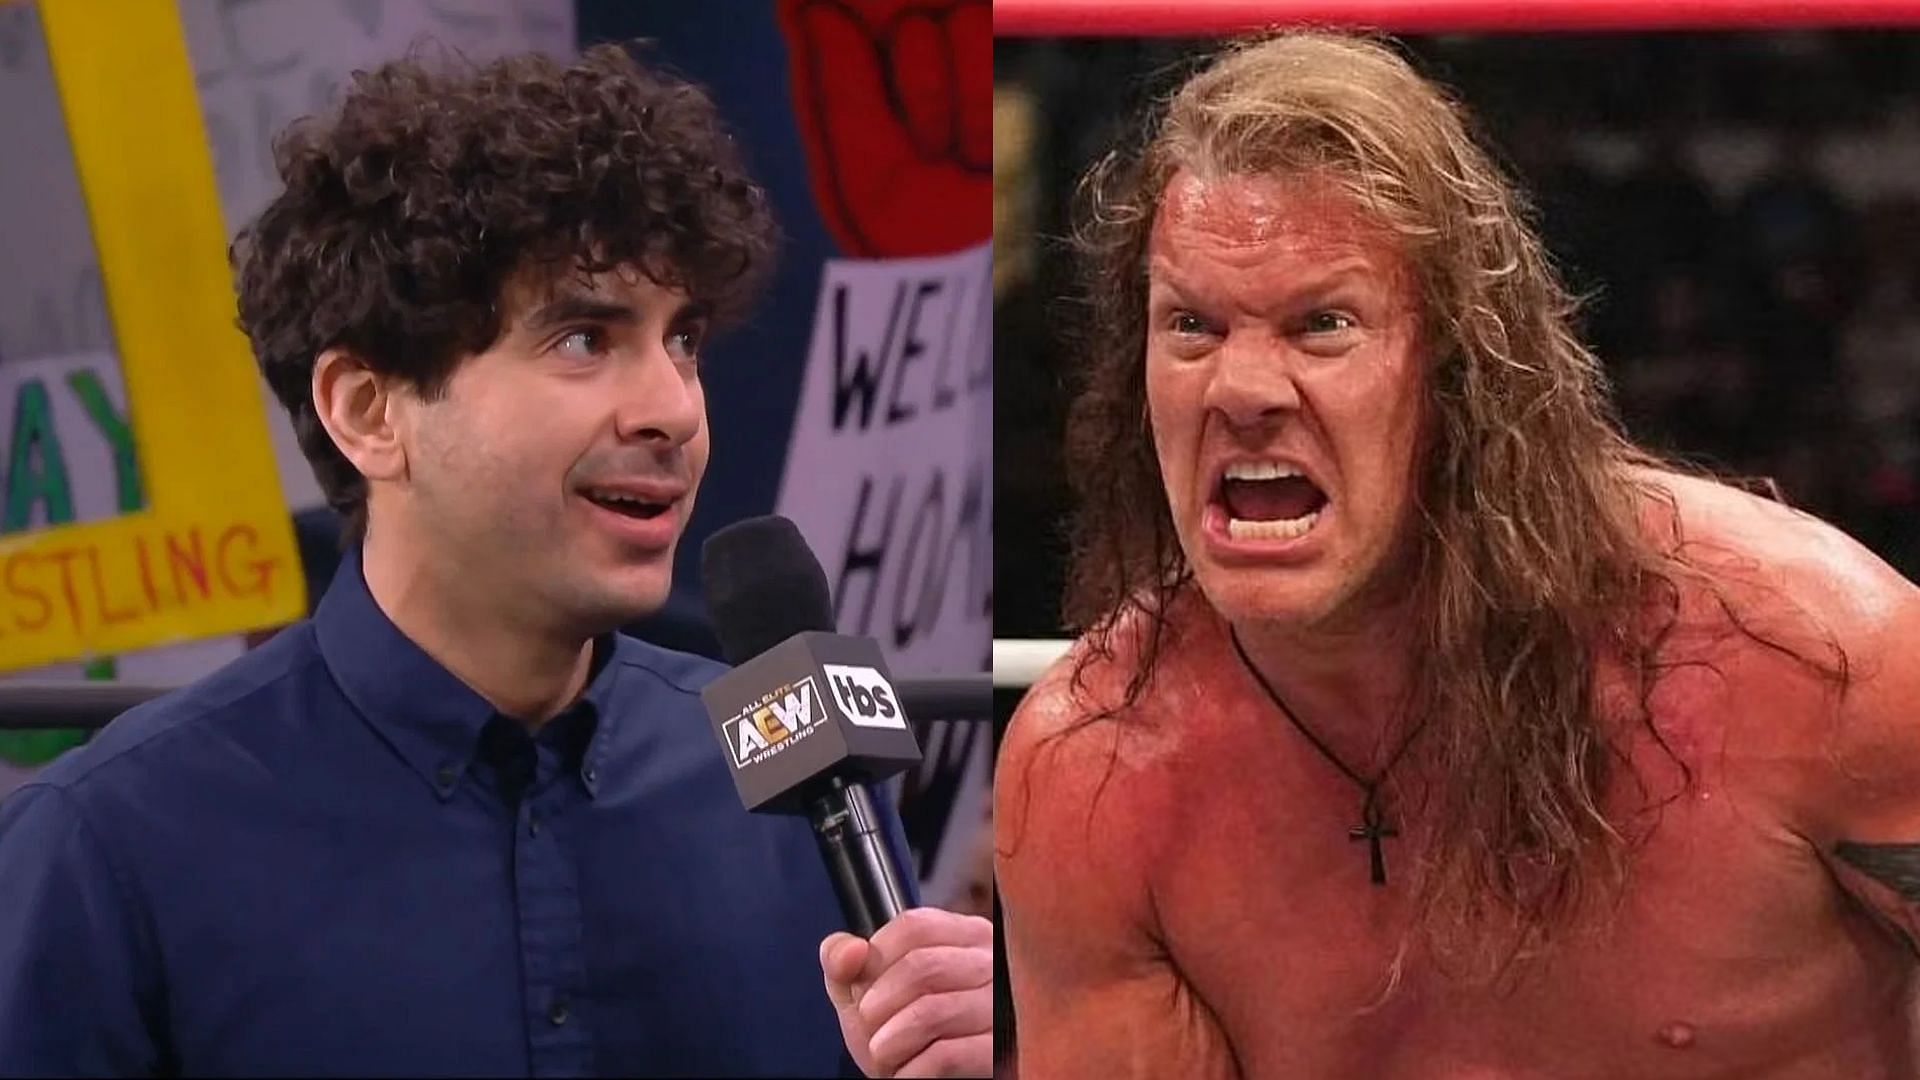 Chris Jericho was the first signee of Tony Khan